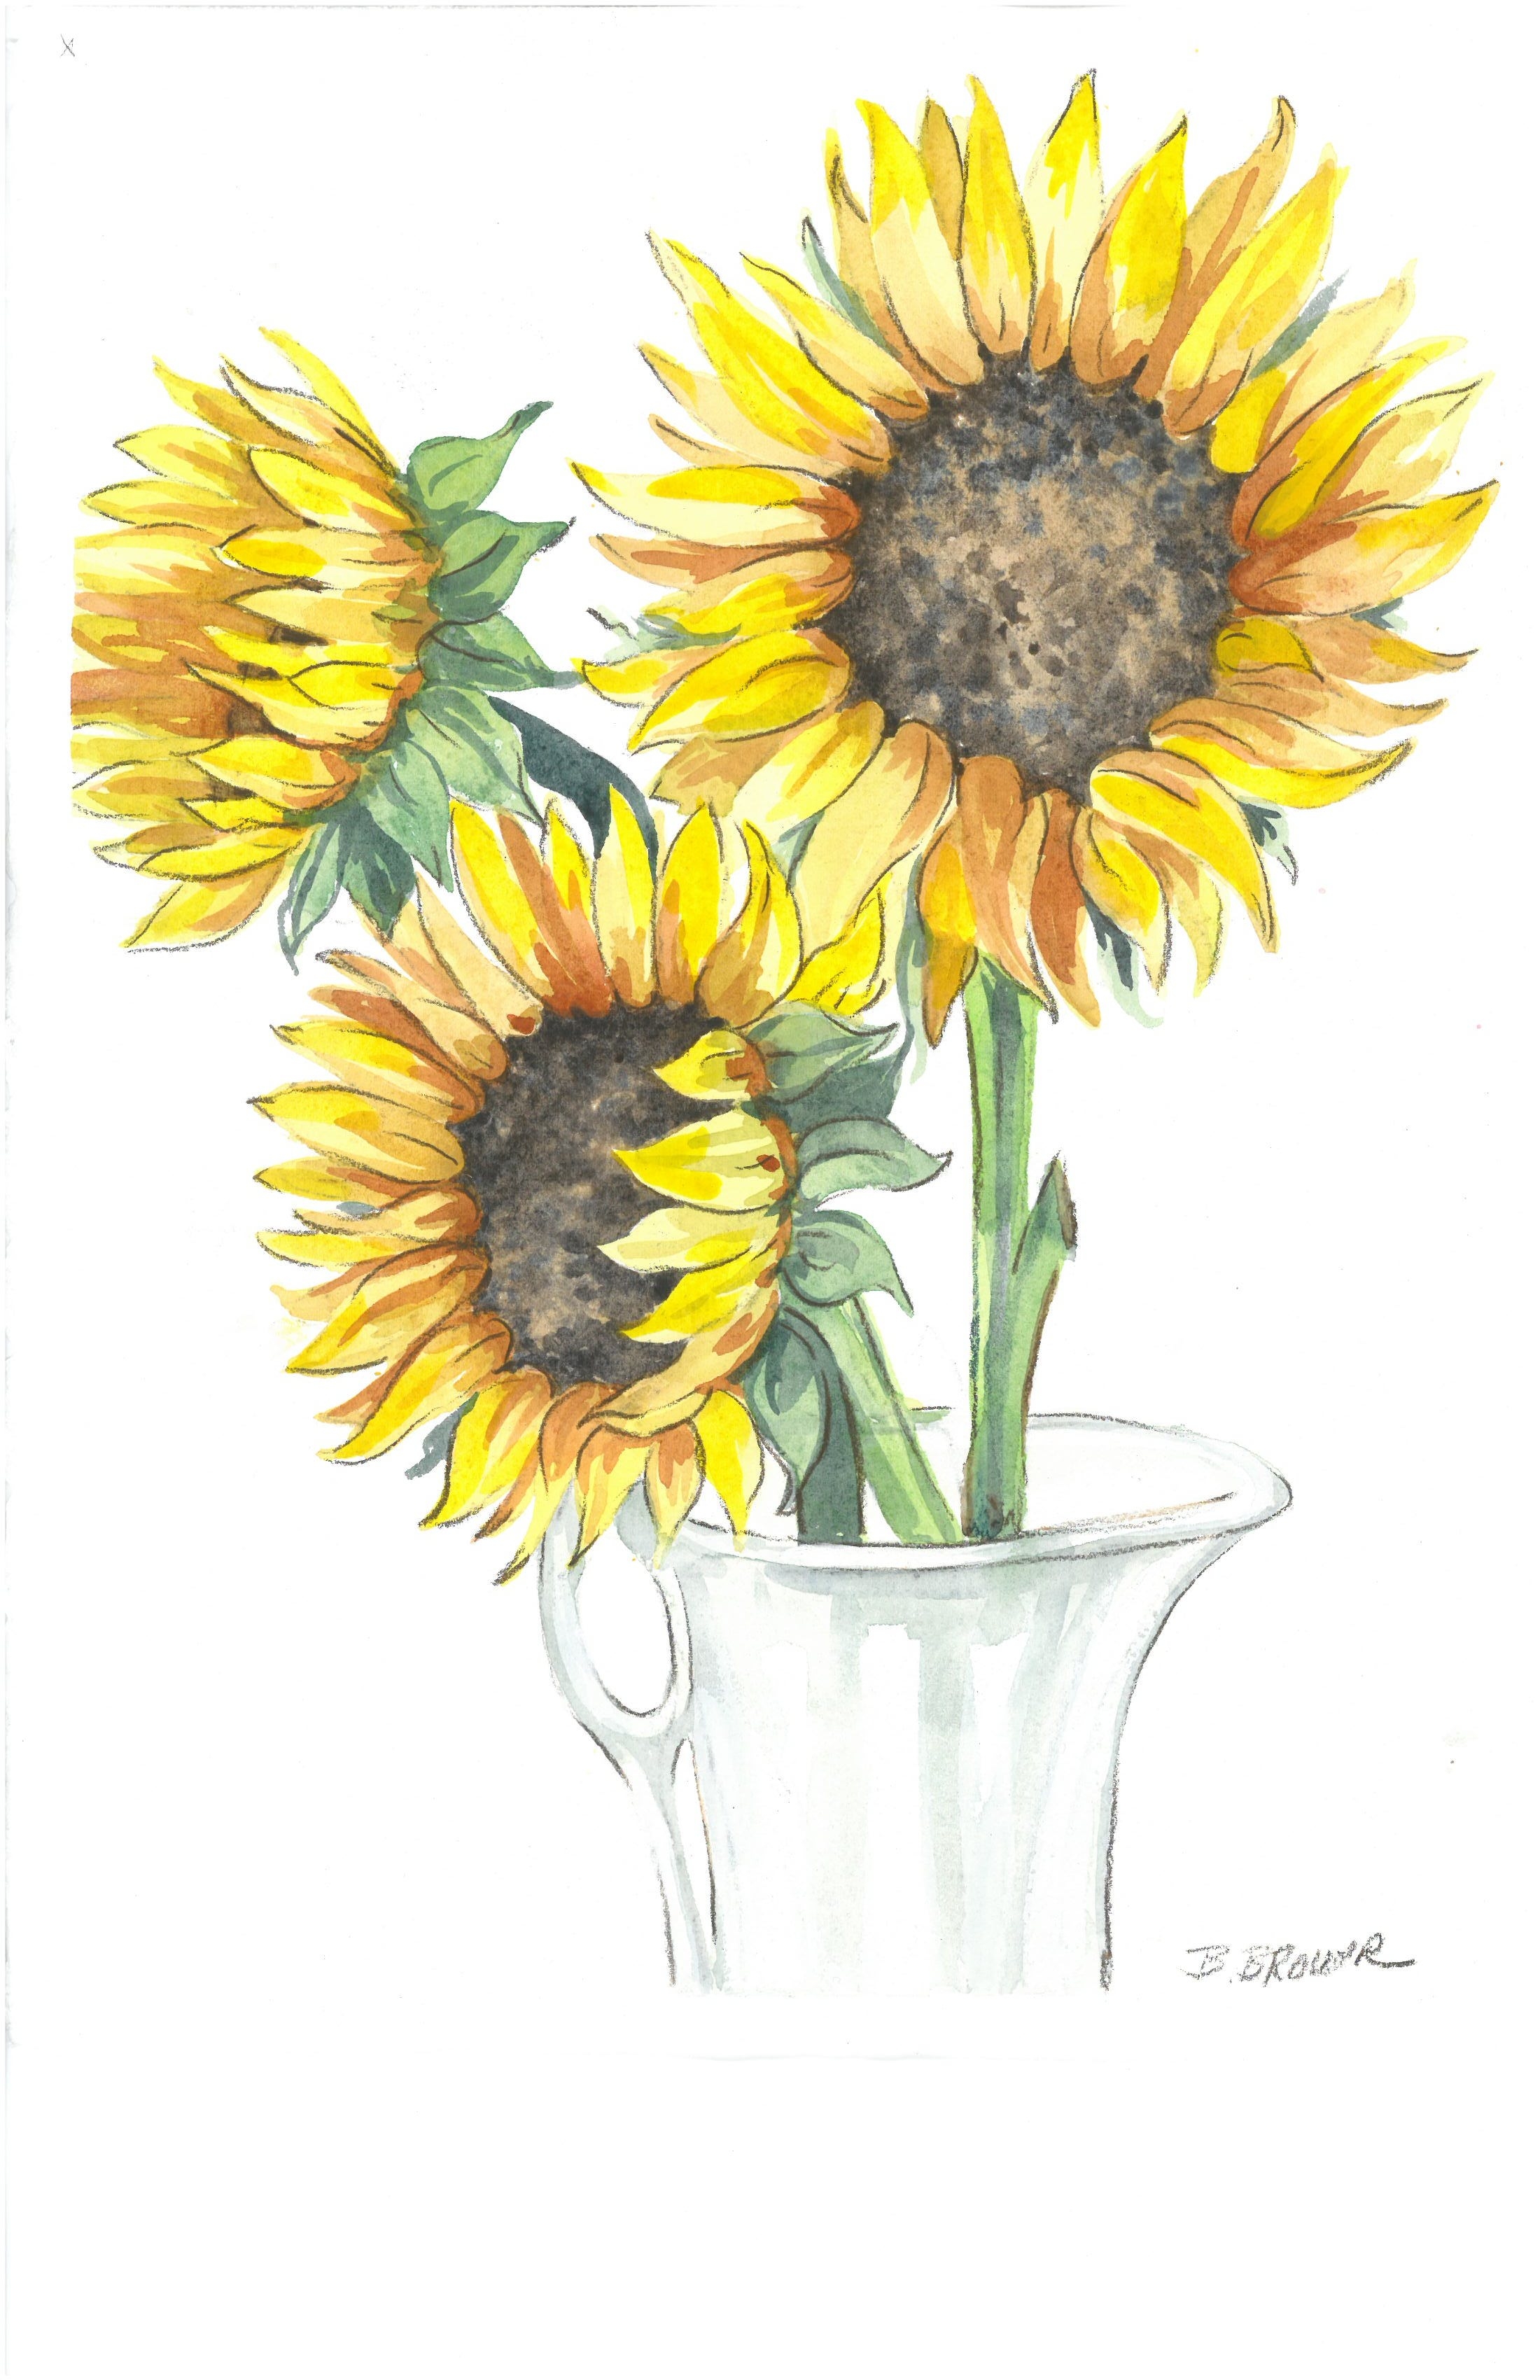 Beauty of Watercolor - Sunflowers | VisArts